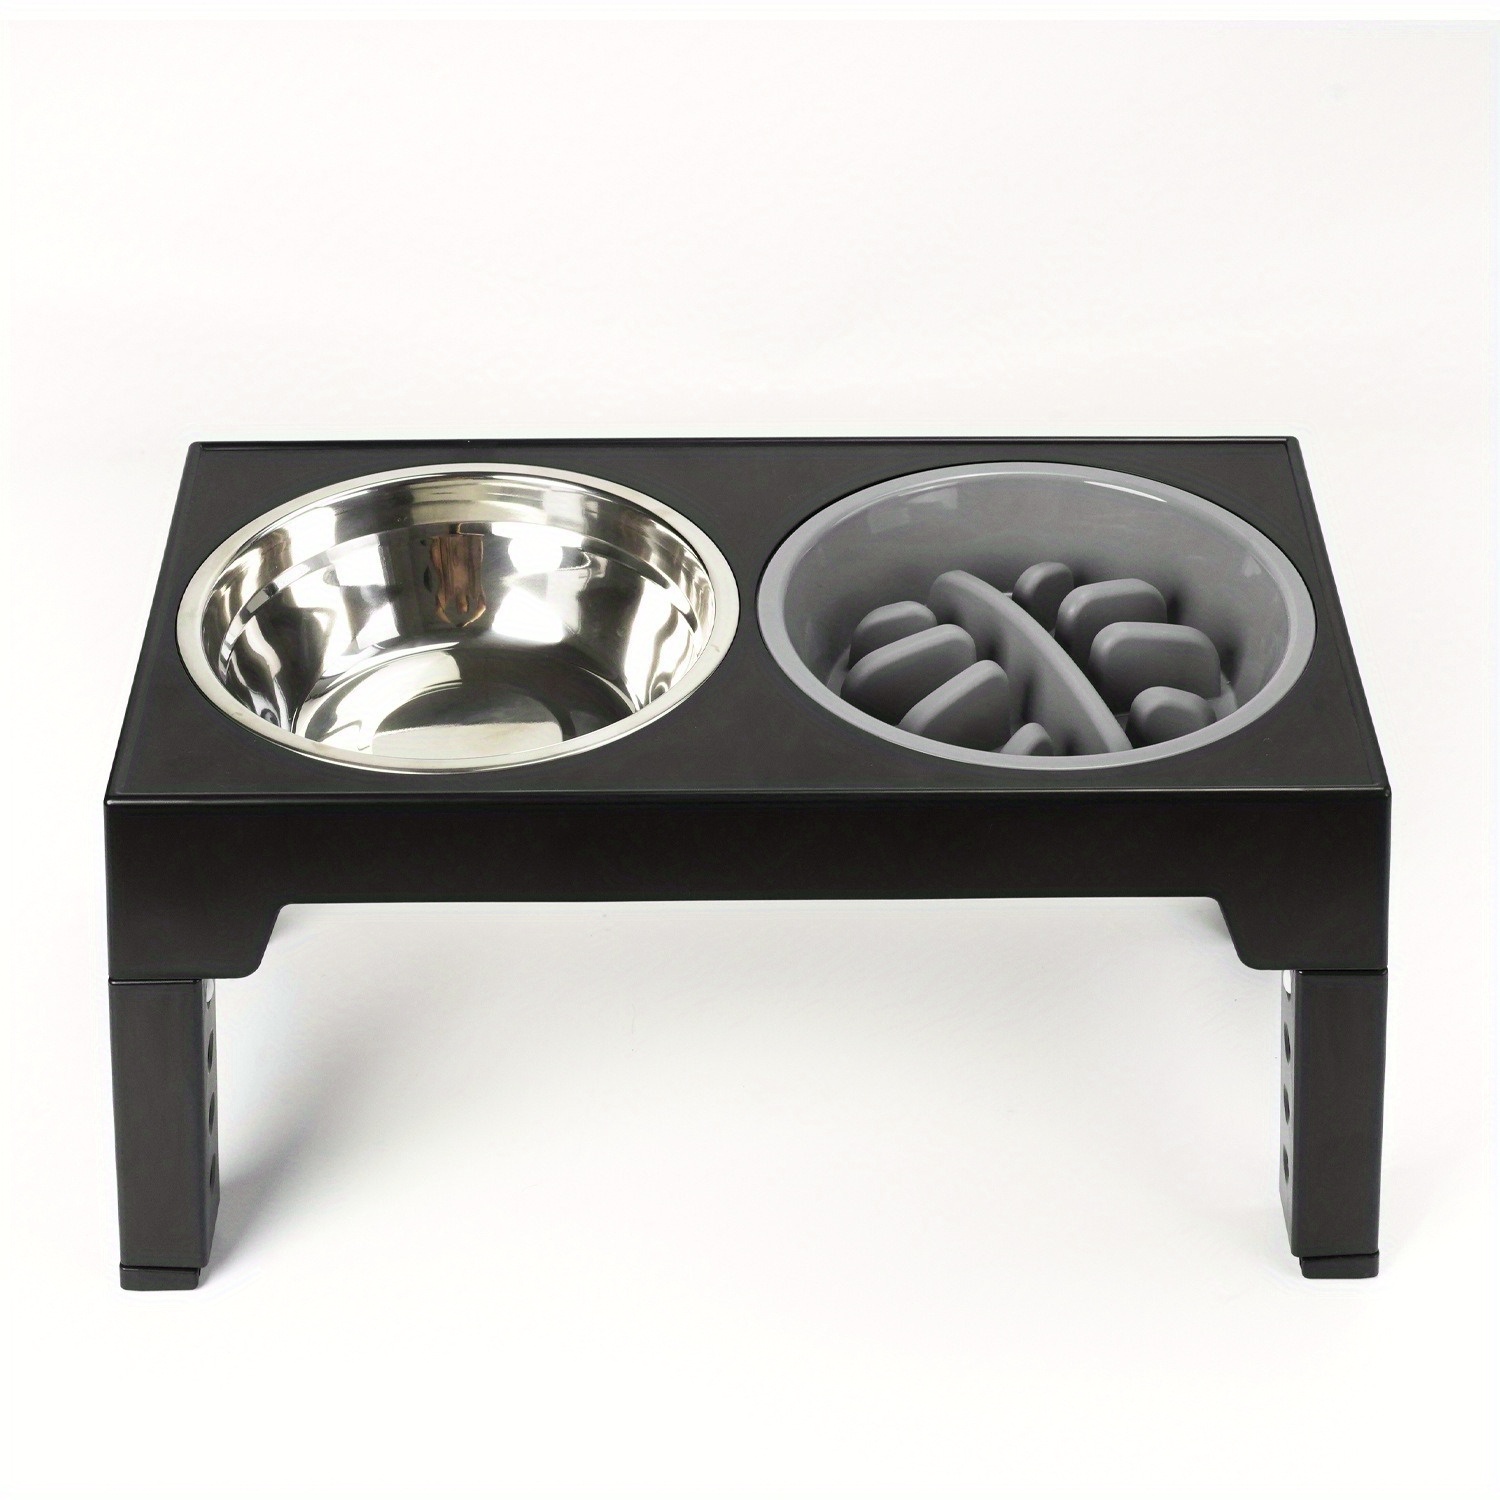 Elevated Dog Bowls Adjustable Raised Dog Bowl With 2 Stainless